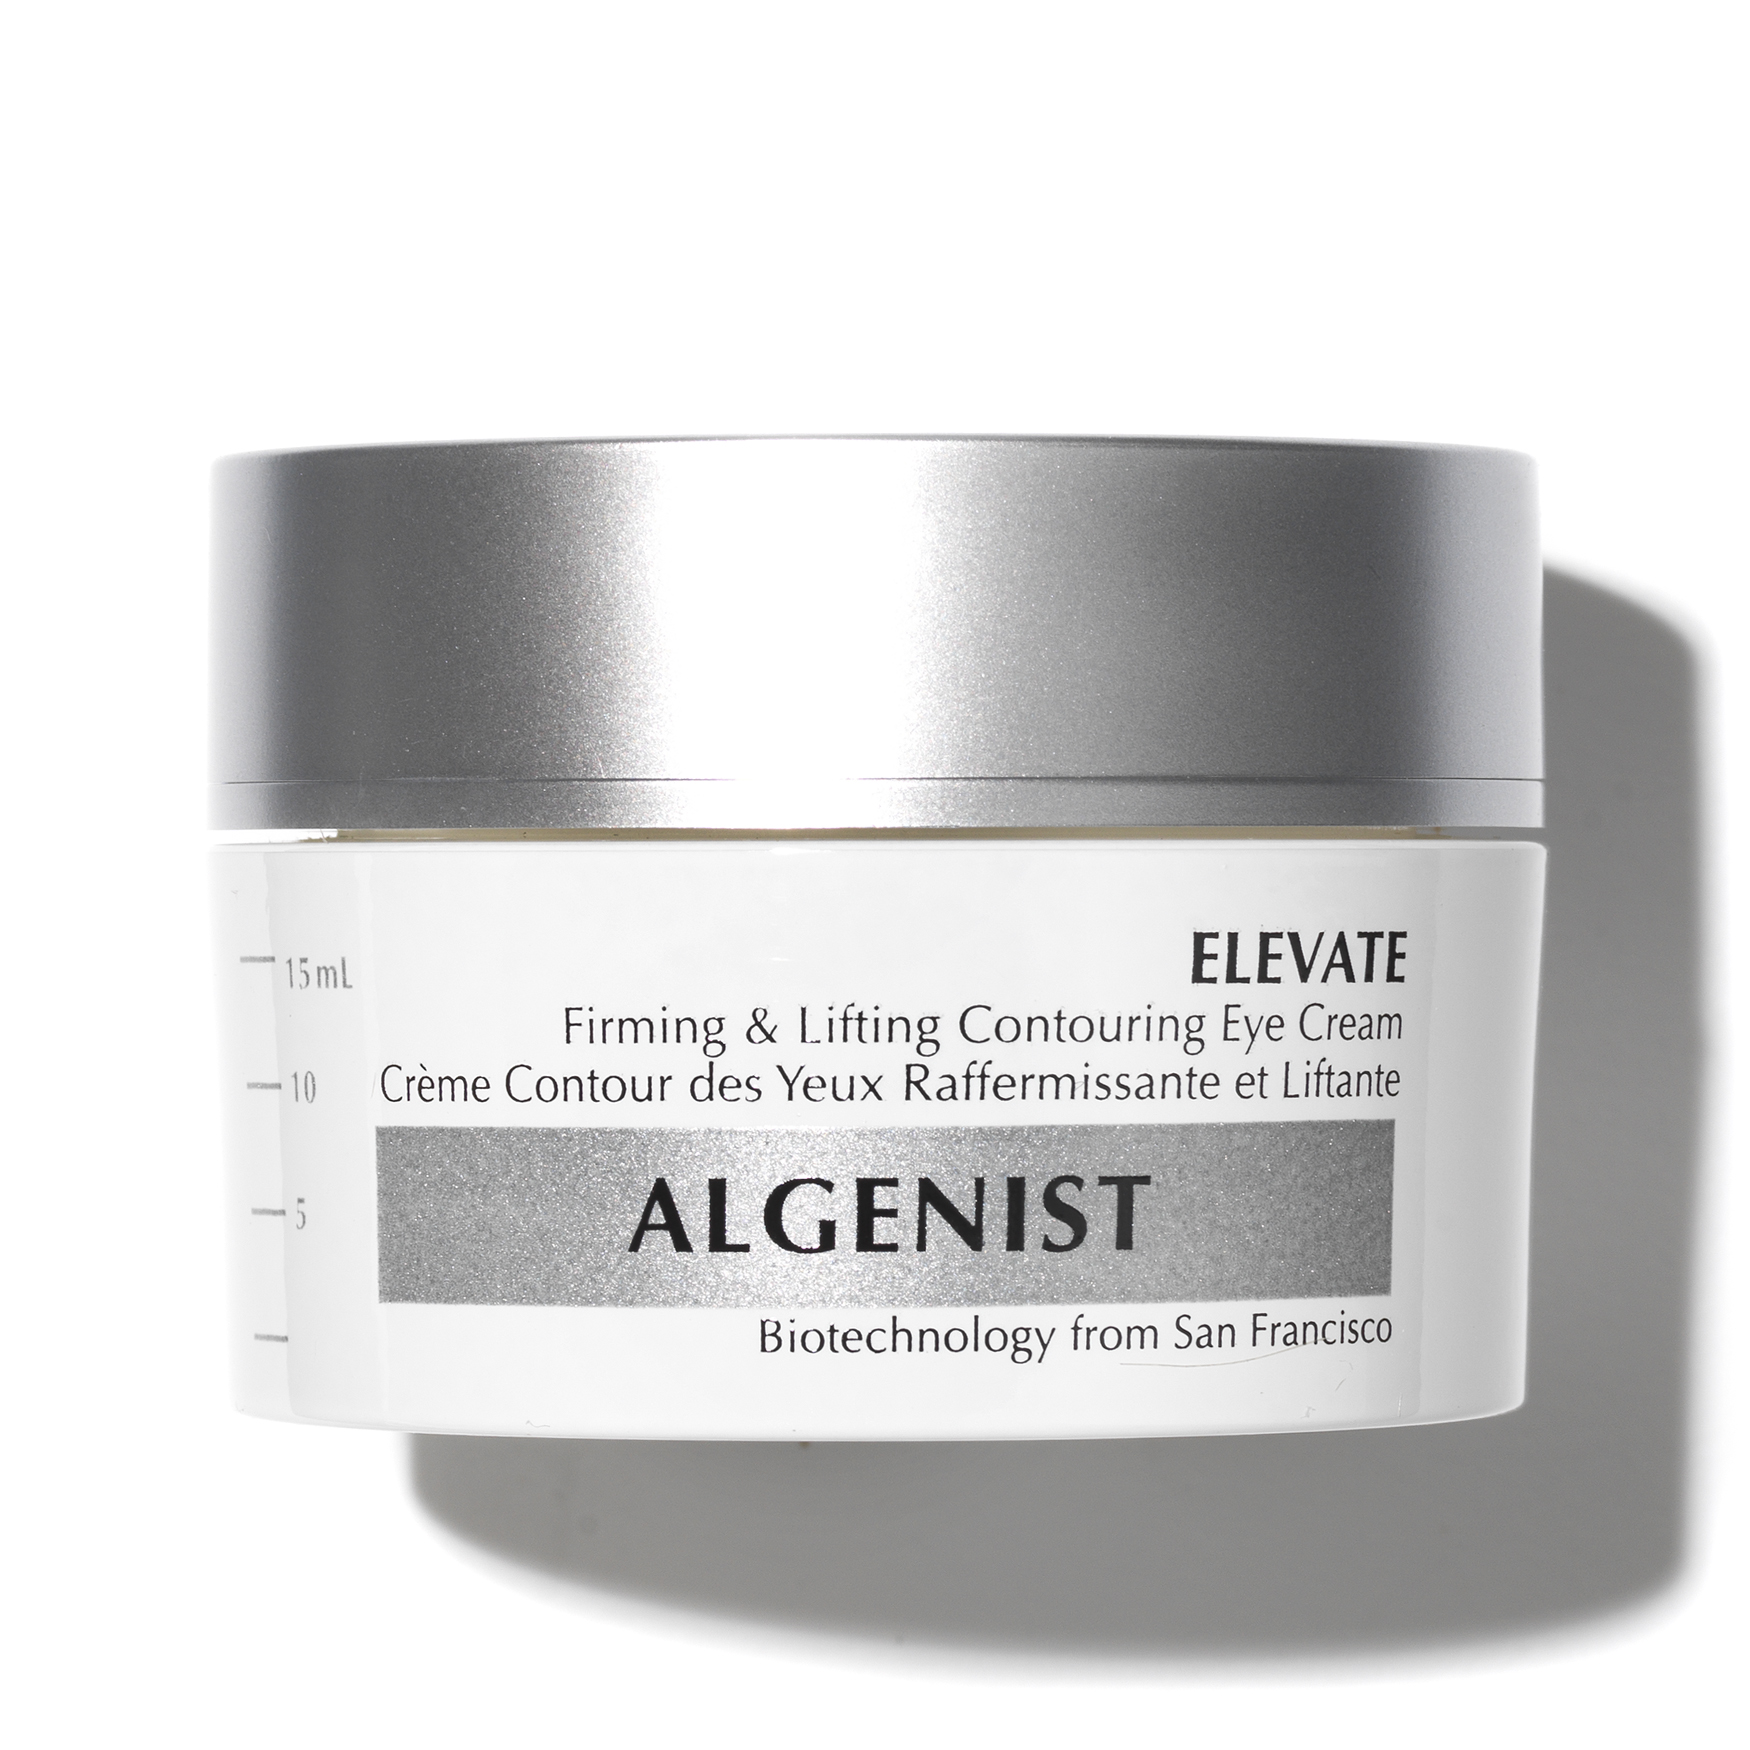 Algenist Elevate Firming & Lifting Contouring Eye Cream | Space NK